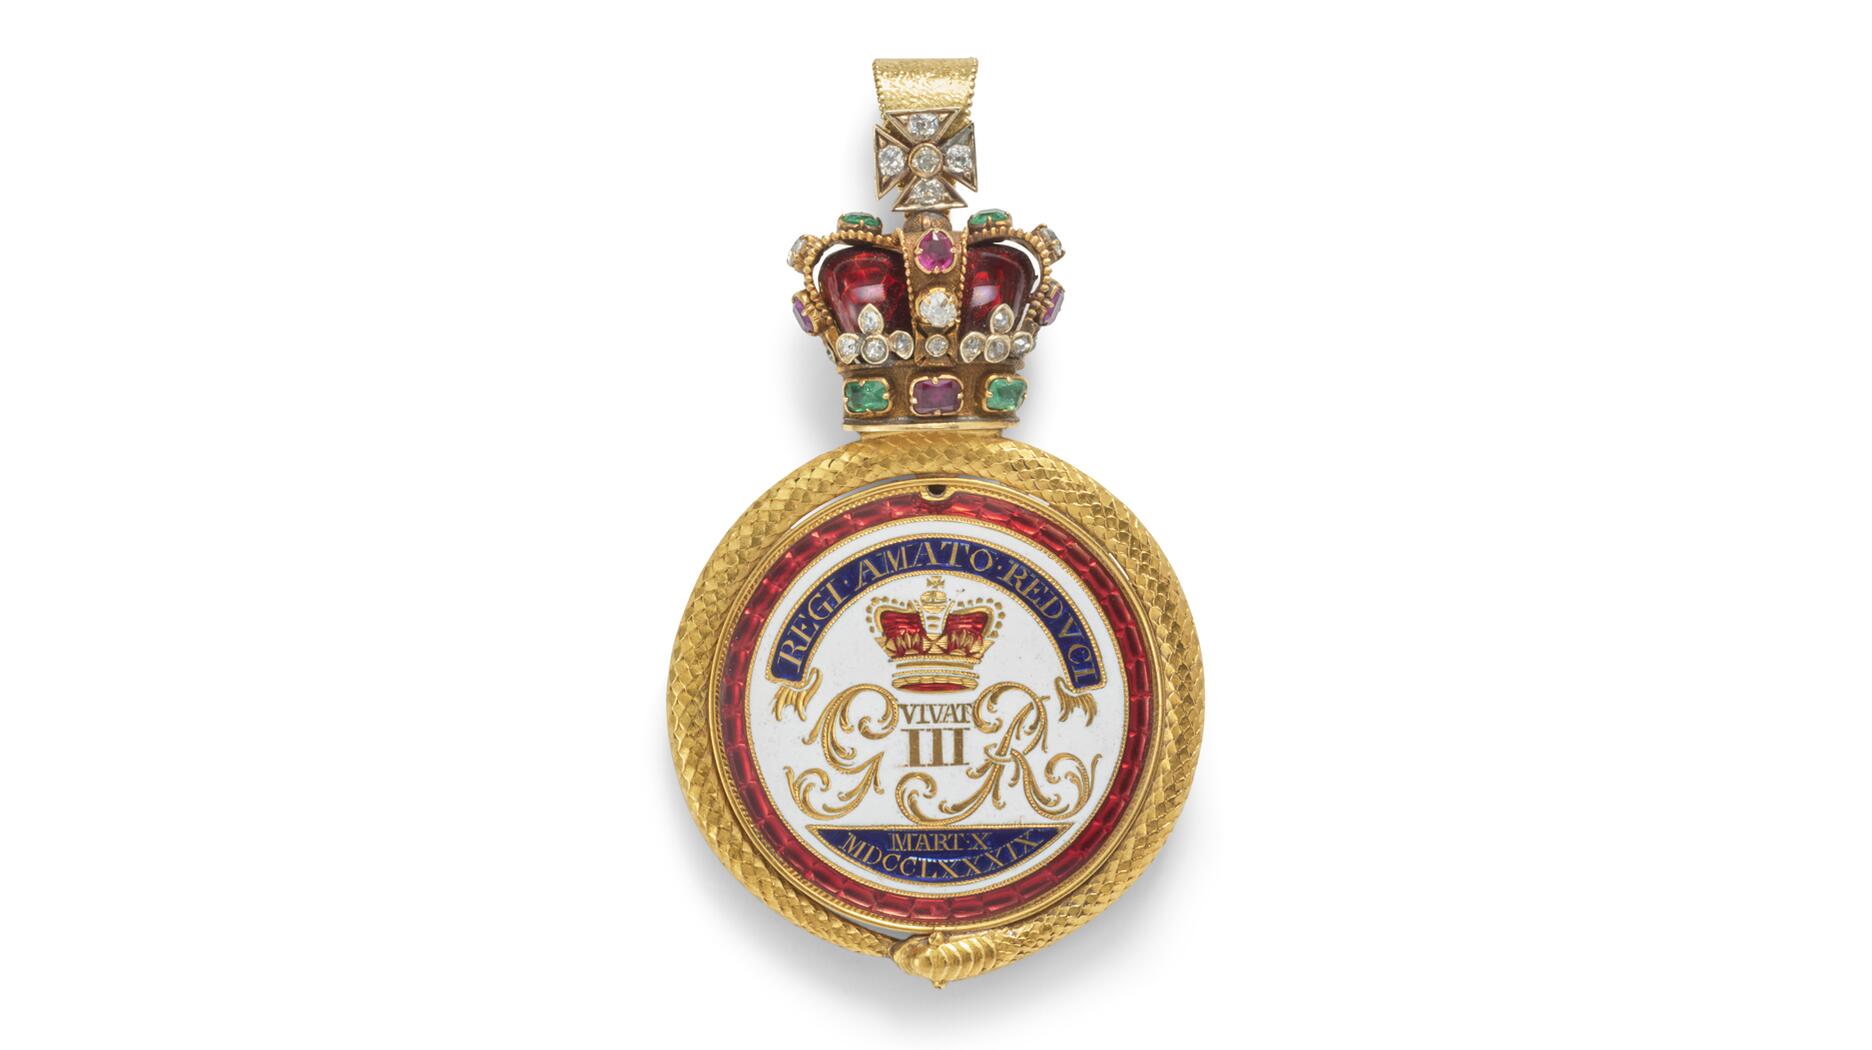 King George III Return from Illness medallion locket pendant with lock of his hair and Queen Charlotte’s hair